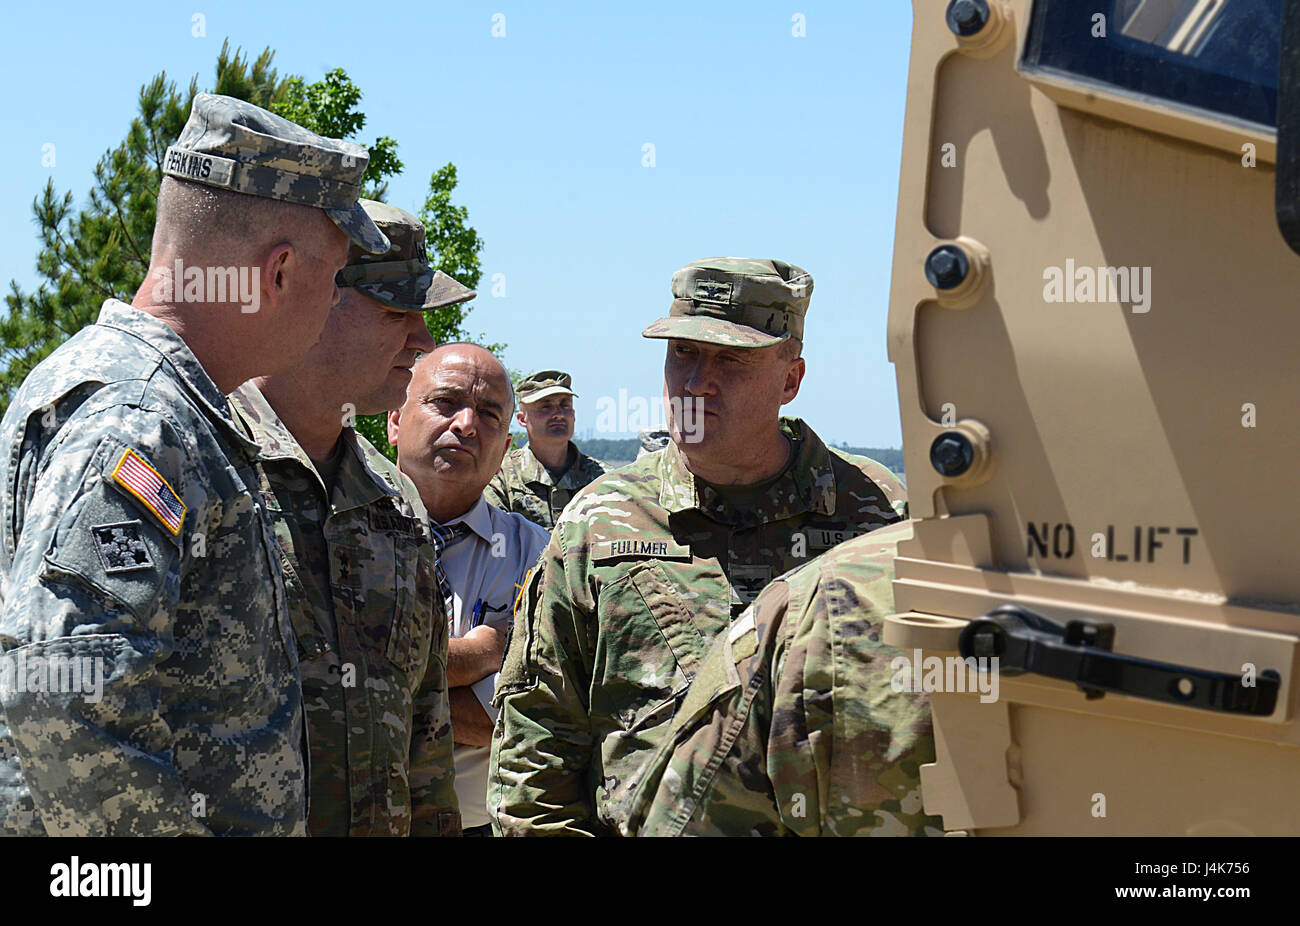 U.S. Army Gen. David Perkins, commanding general, U.S. Army Training and Doctrine Command, and  Maj. Gen. Bo Dyess, Army Capabilities Integration Center director, are briefed by Col. Shane Fullmer, JLTV joint project manager on a production model Joint Light Tactical Vehicle at Joint Base Langley-Eustis, Va., May 2, 2017. The JLTV program is an Army-led agenda collaborating with the U.S. Marine Corps to replace a portion of each branch's light tactical vehicle fleets.  (U.S. Air Force photo/Staff Sgt. Teresa J. Cleveland) Stock Photo